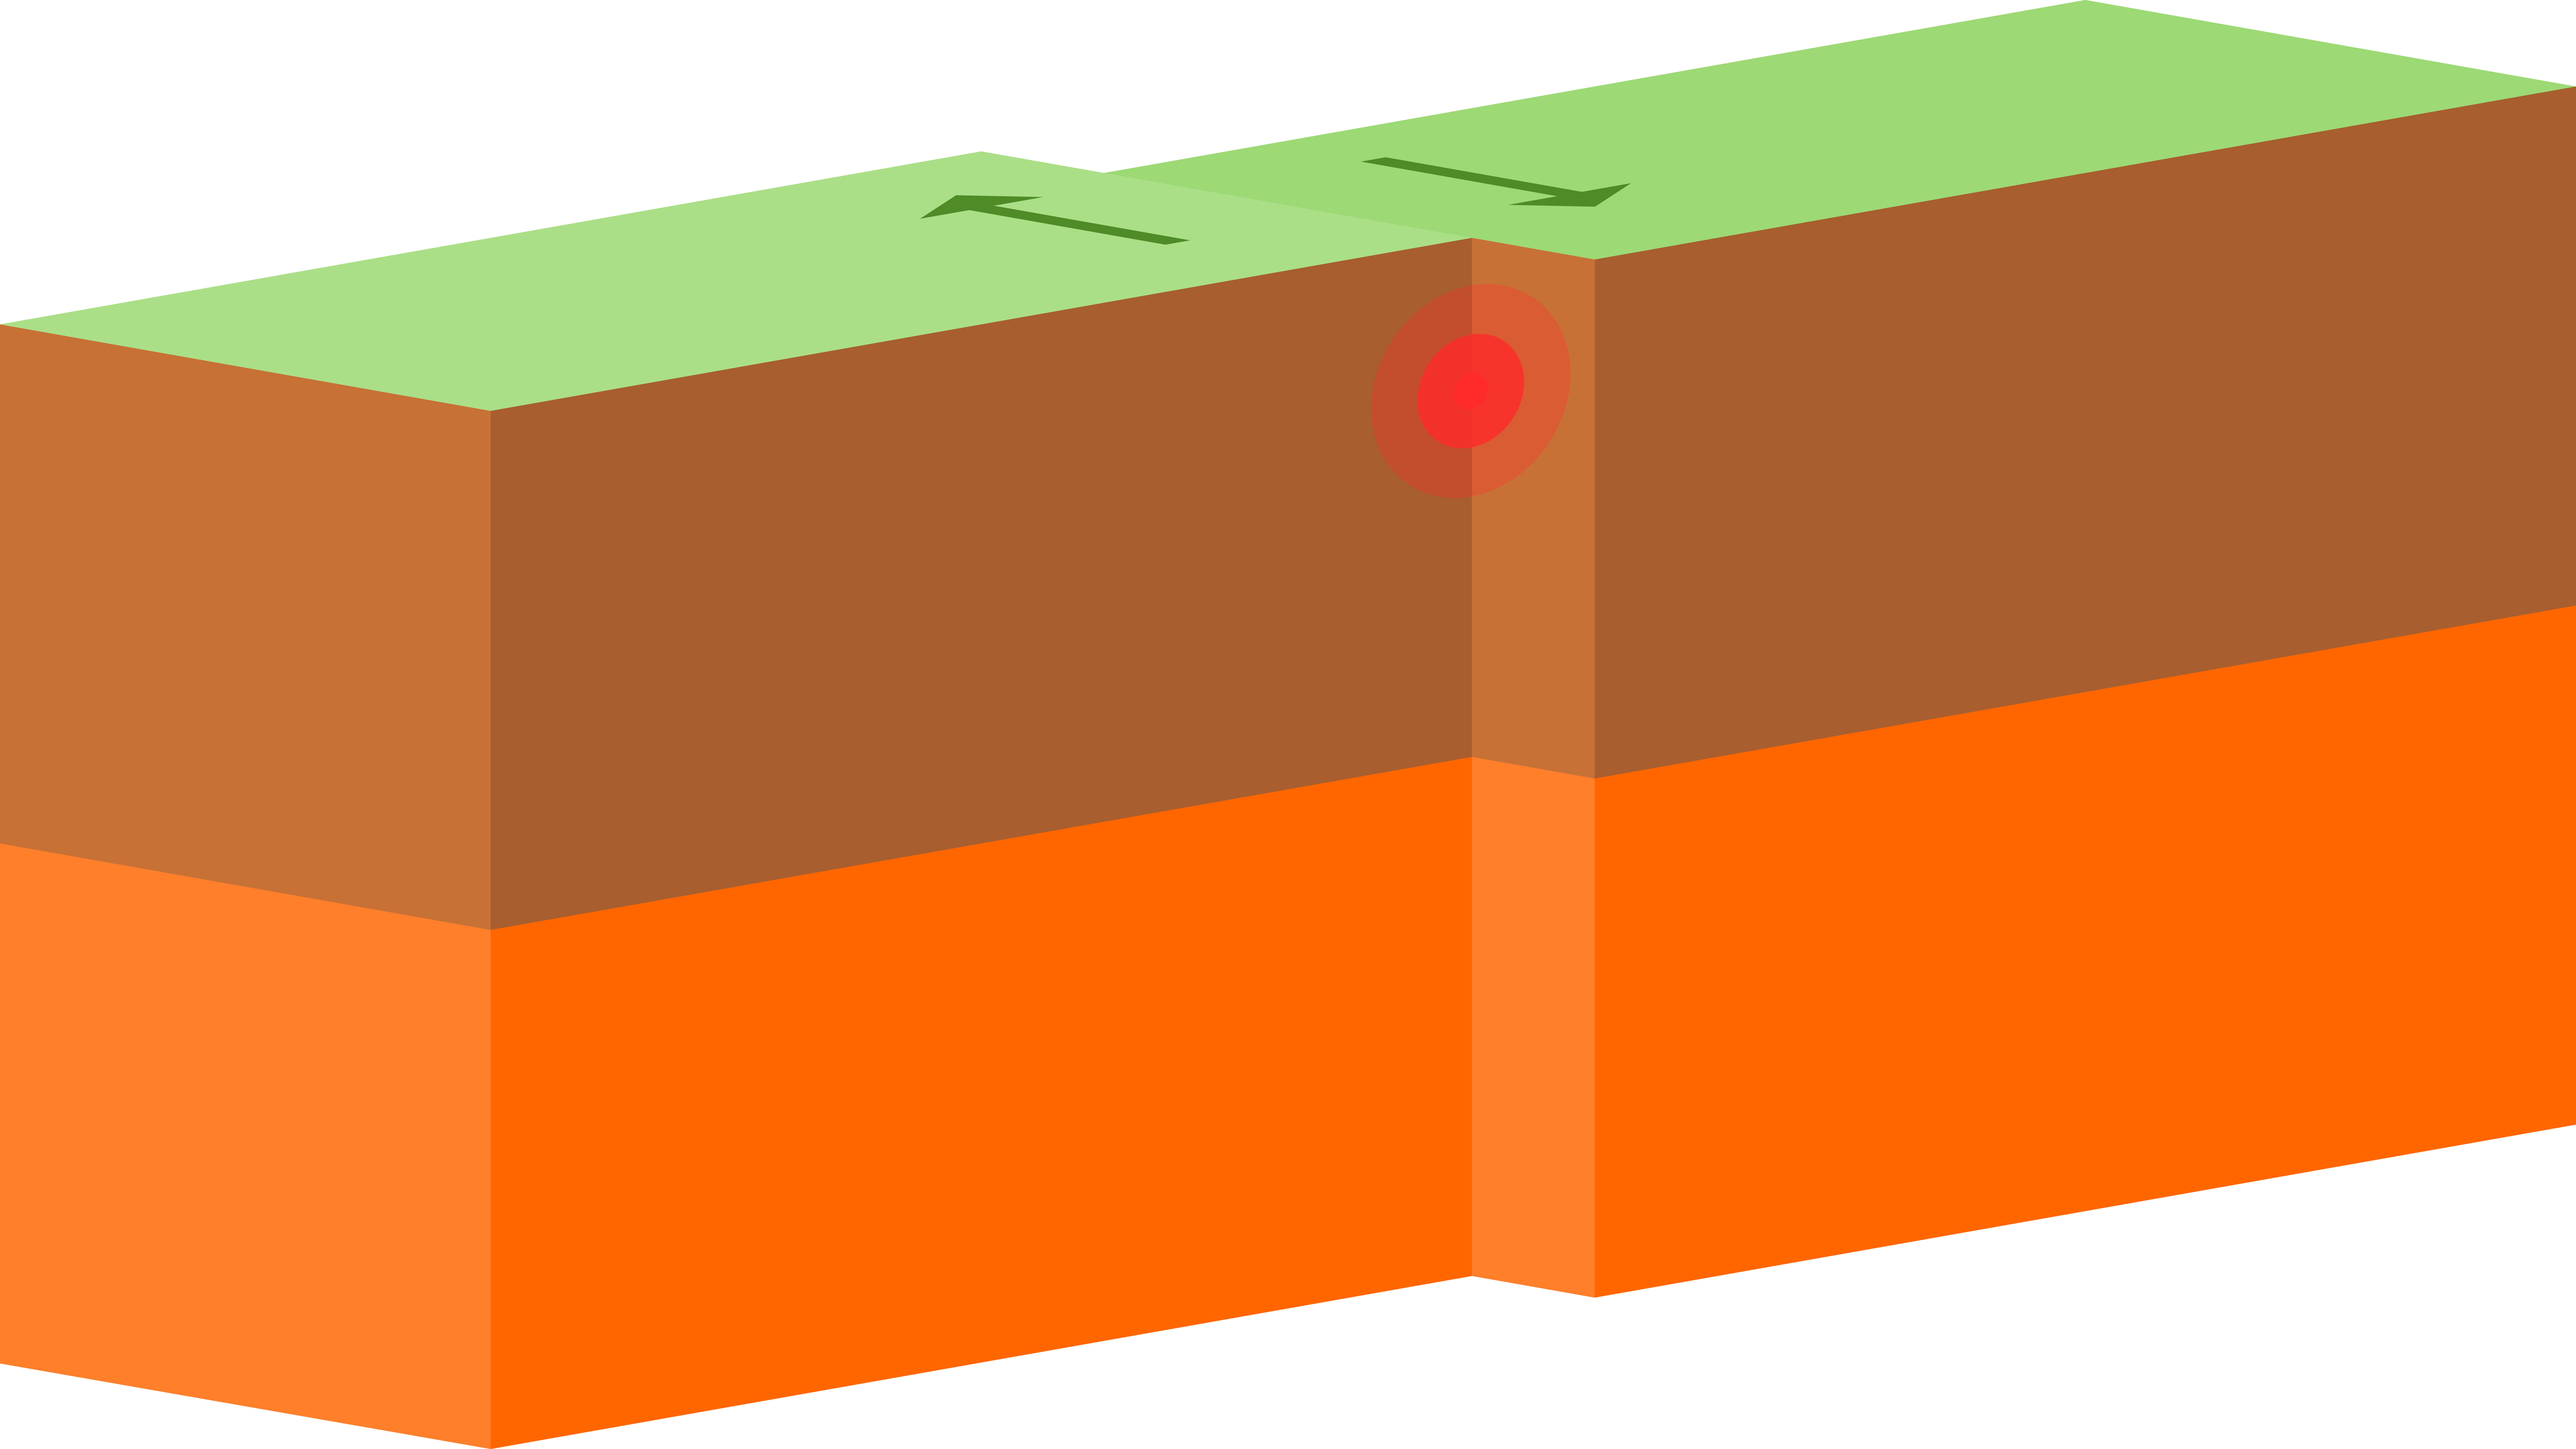 A transform plate boundary. https://commons.wikimedia.org/wiki/File:Continental-continental_conservative_plate_boundary_opposite_directions.svg